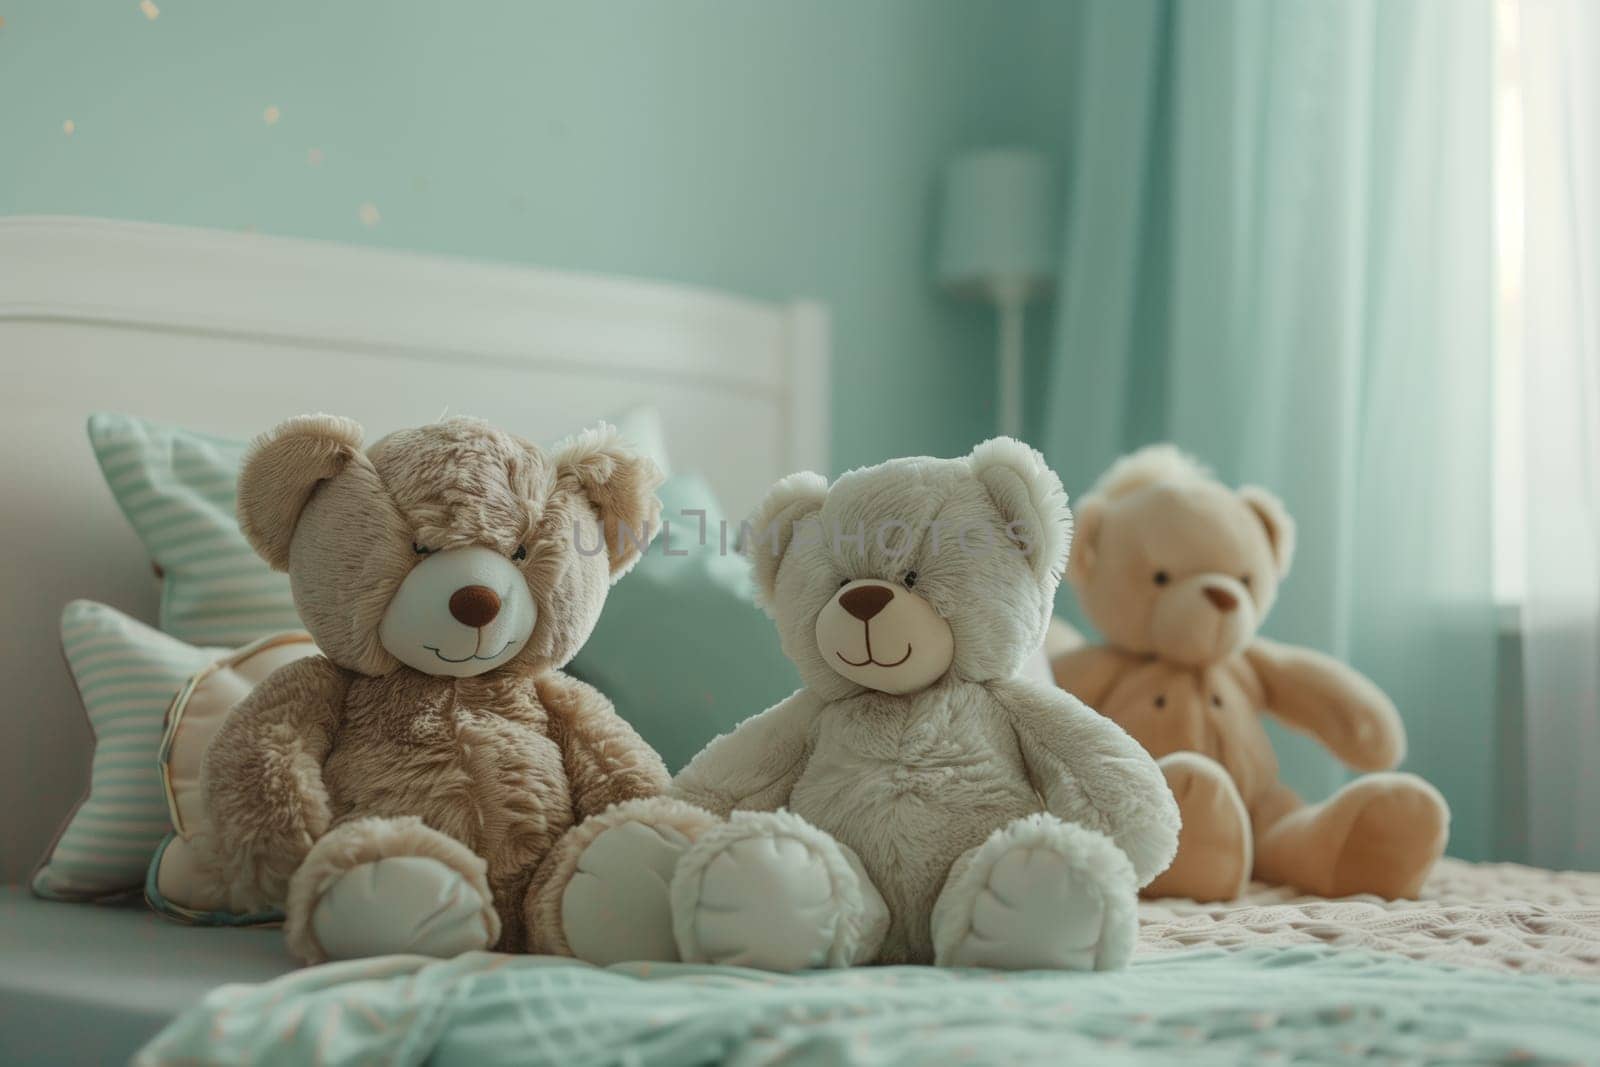 Three vertebrate mammal toys, known as teddy bears, are artfully placed on a bed in a room. Their plush fur gives them a lifelike appearance as they sit together in a cozy arrangement